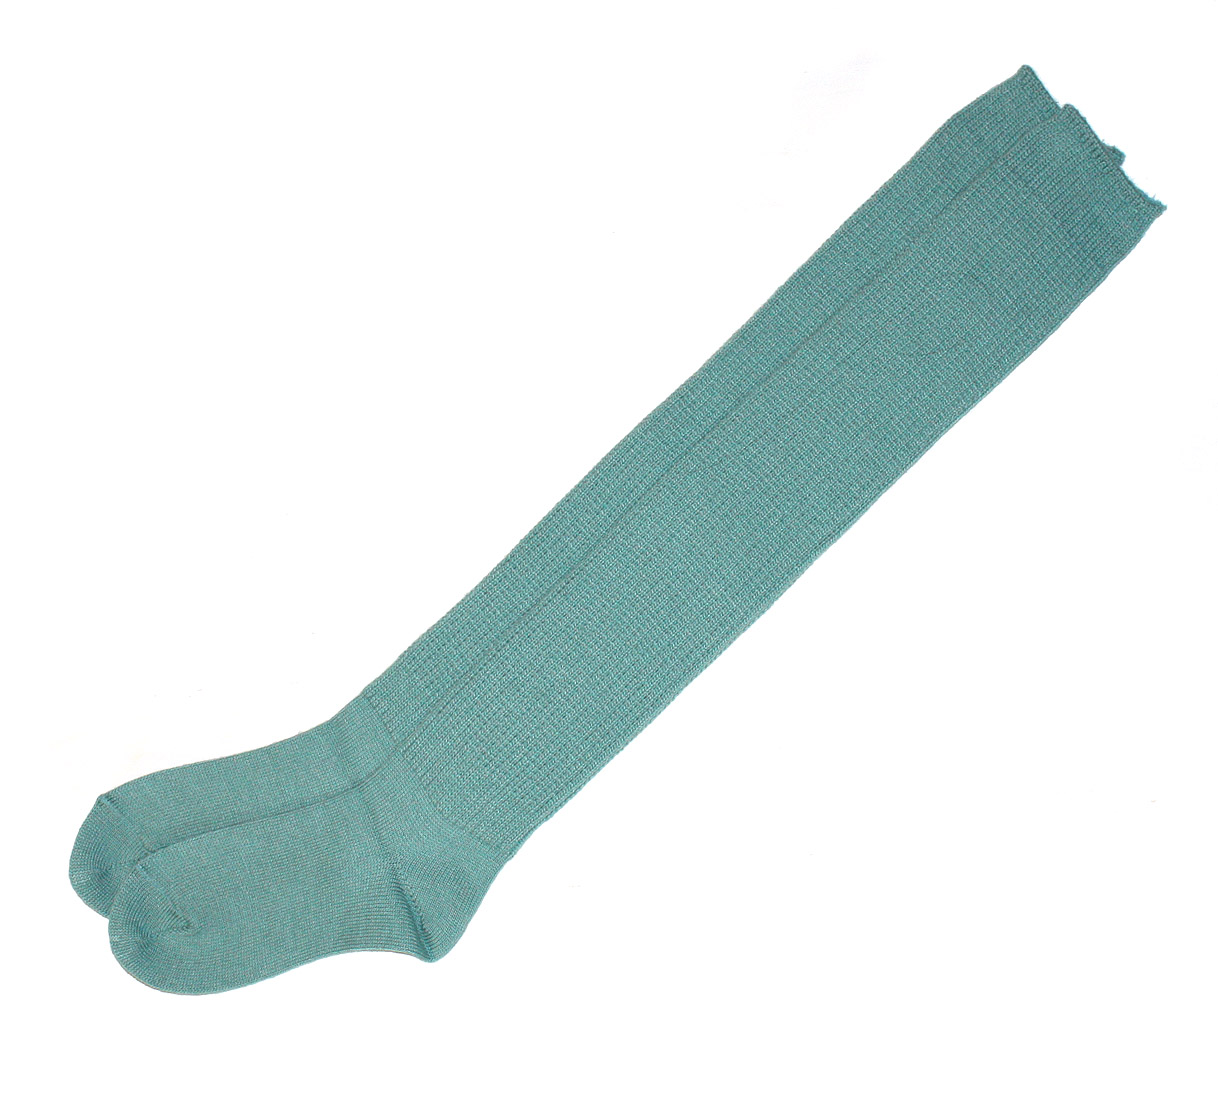 Mint Green Slouchy Sock | Scrunchy Over the Knee Socks | Playful Sophisticated Footwear & Legwear at Between the Sheets